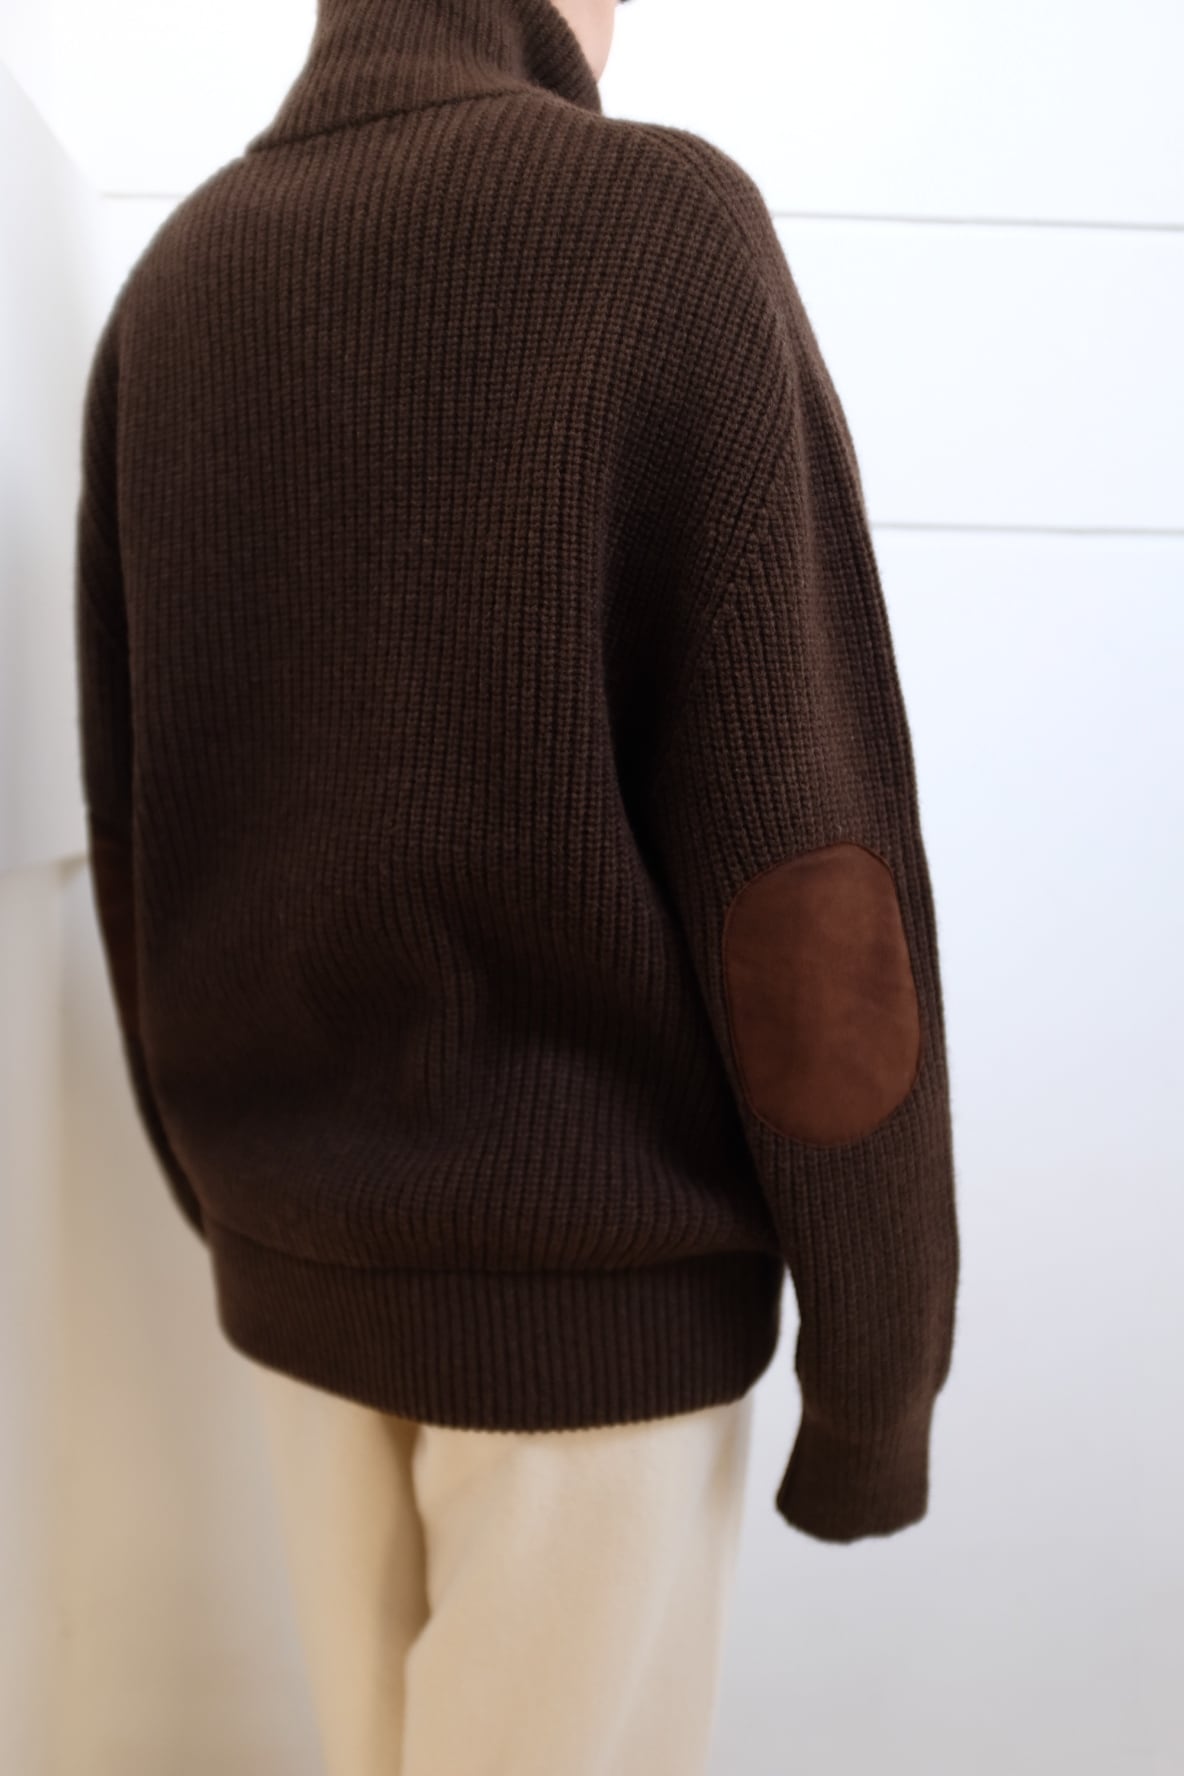 [Phlannel]wool yak driving knit blouson | YES-姫路の美容院と服のお店YES(イエス)です。  powered by BASE